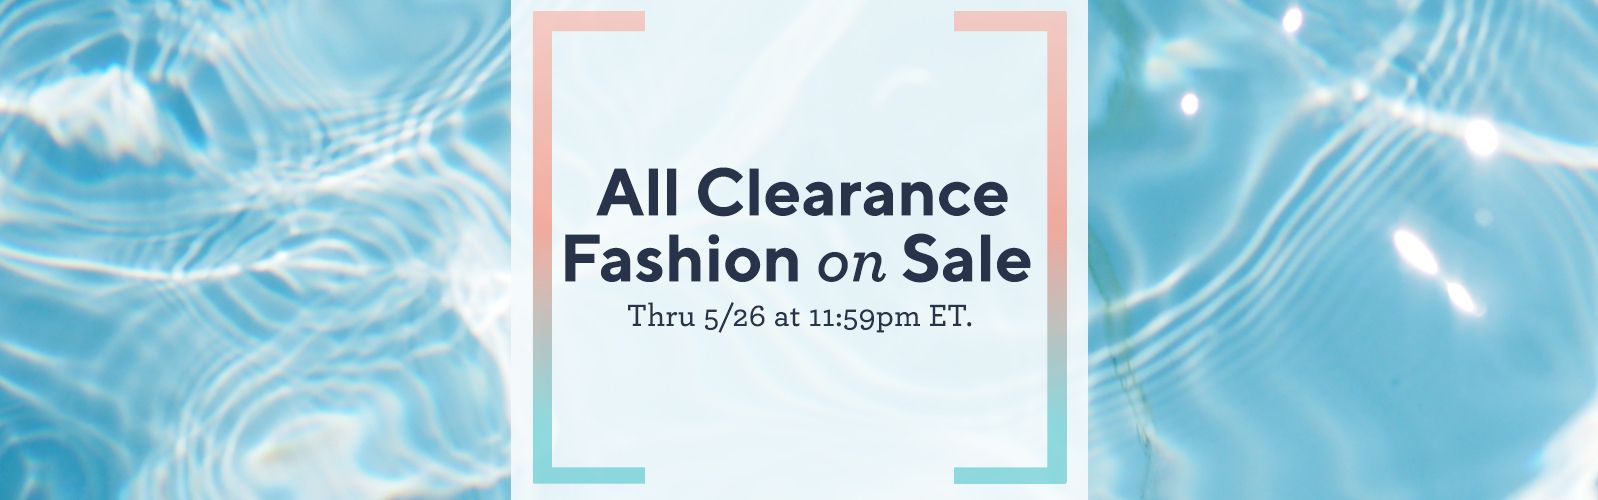 All Clearance Fashion on Sale. Thru 5/26 at 11:59pm ET. 